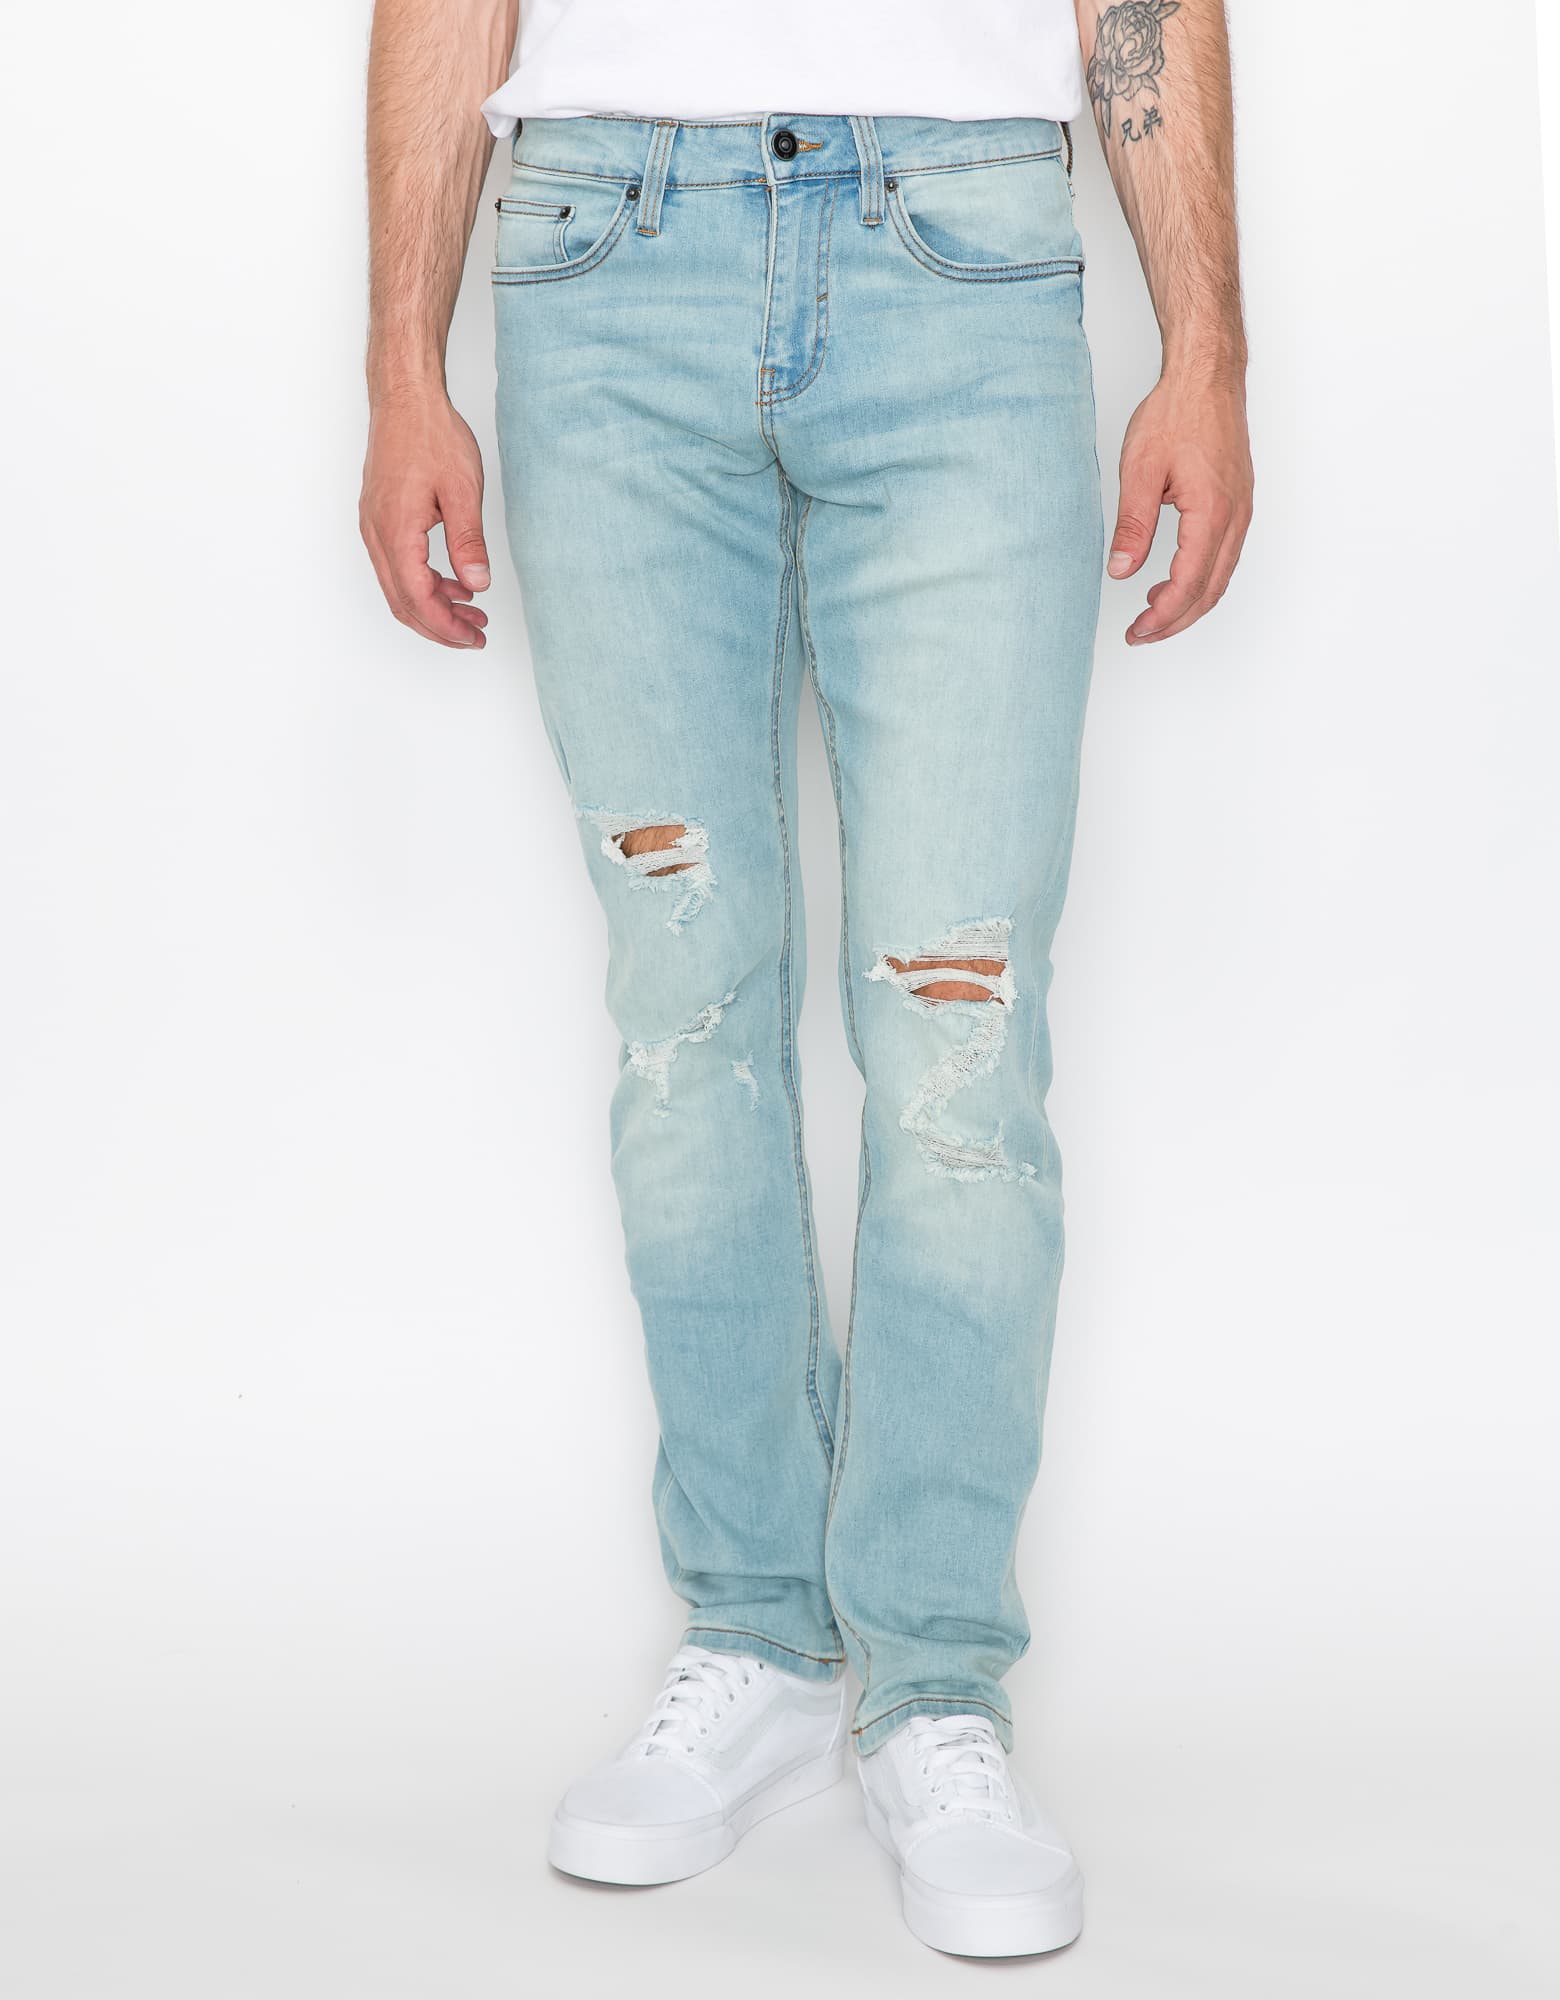 MEN'S CLAW RIPPED SKINNY FIT JEANS